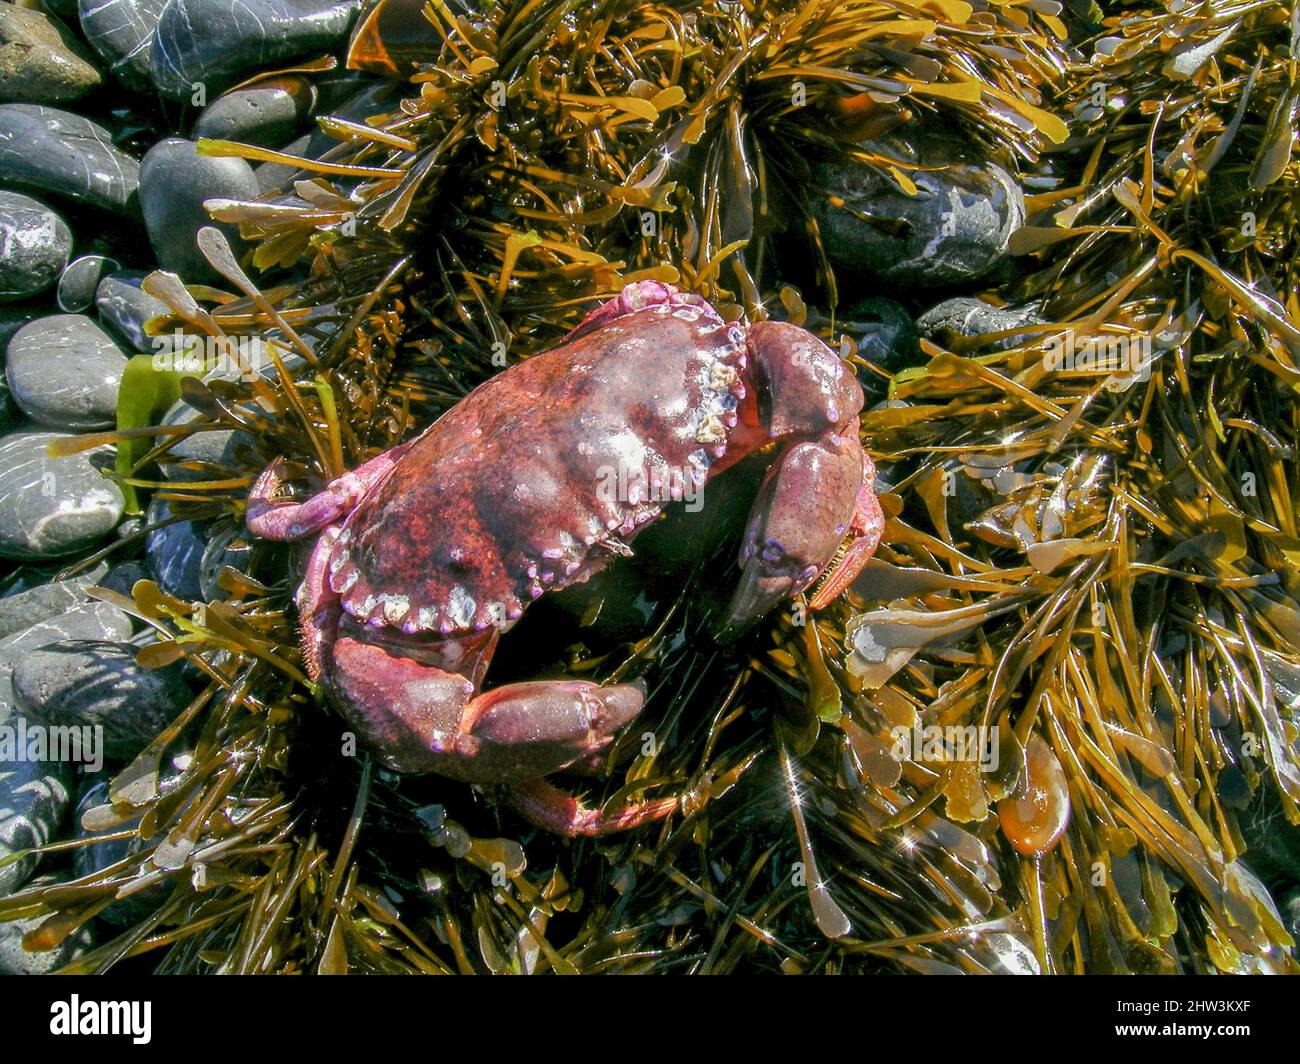 Cancer productus, one of several species known as red rock crabs,is a crab of the genus Cancer found on the western coast of North America. Stock Photo